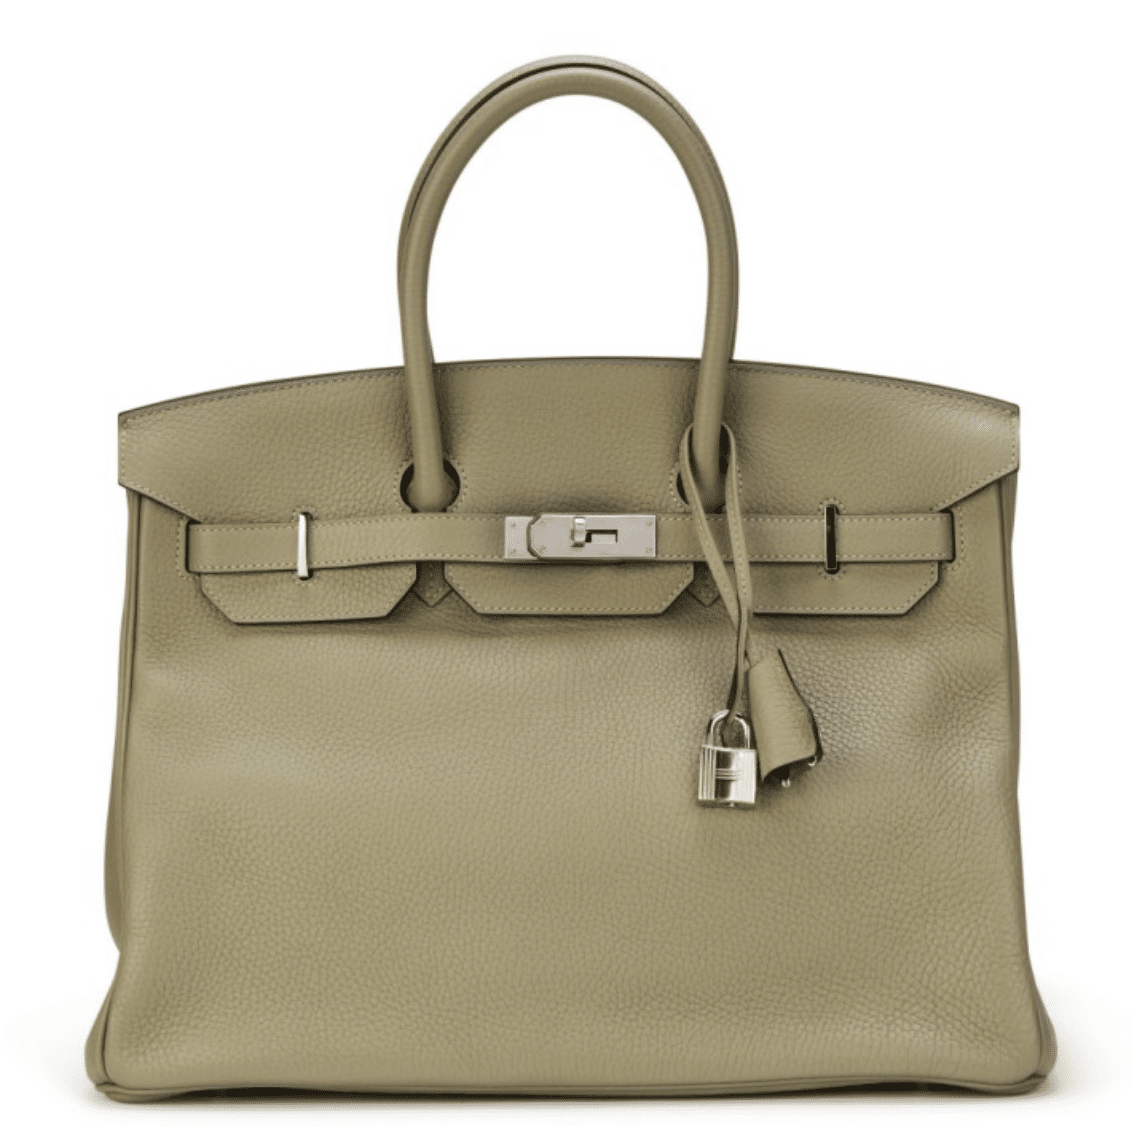 HermÃ¨s Birkin Bag Price List: Our Pricing Guide For 2020 & 2021